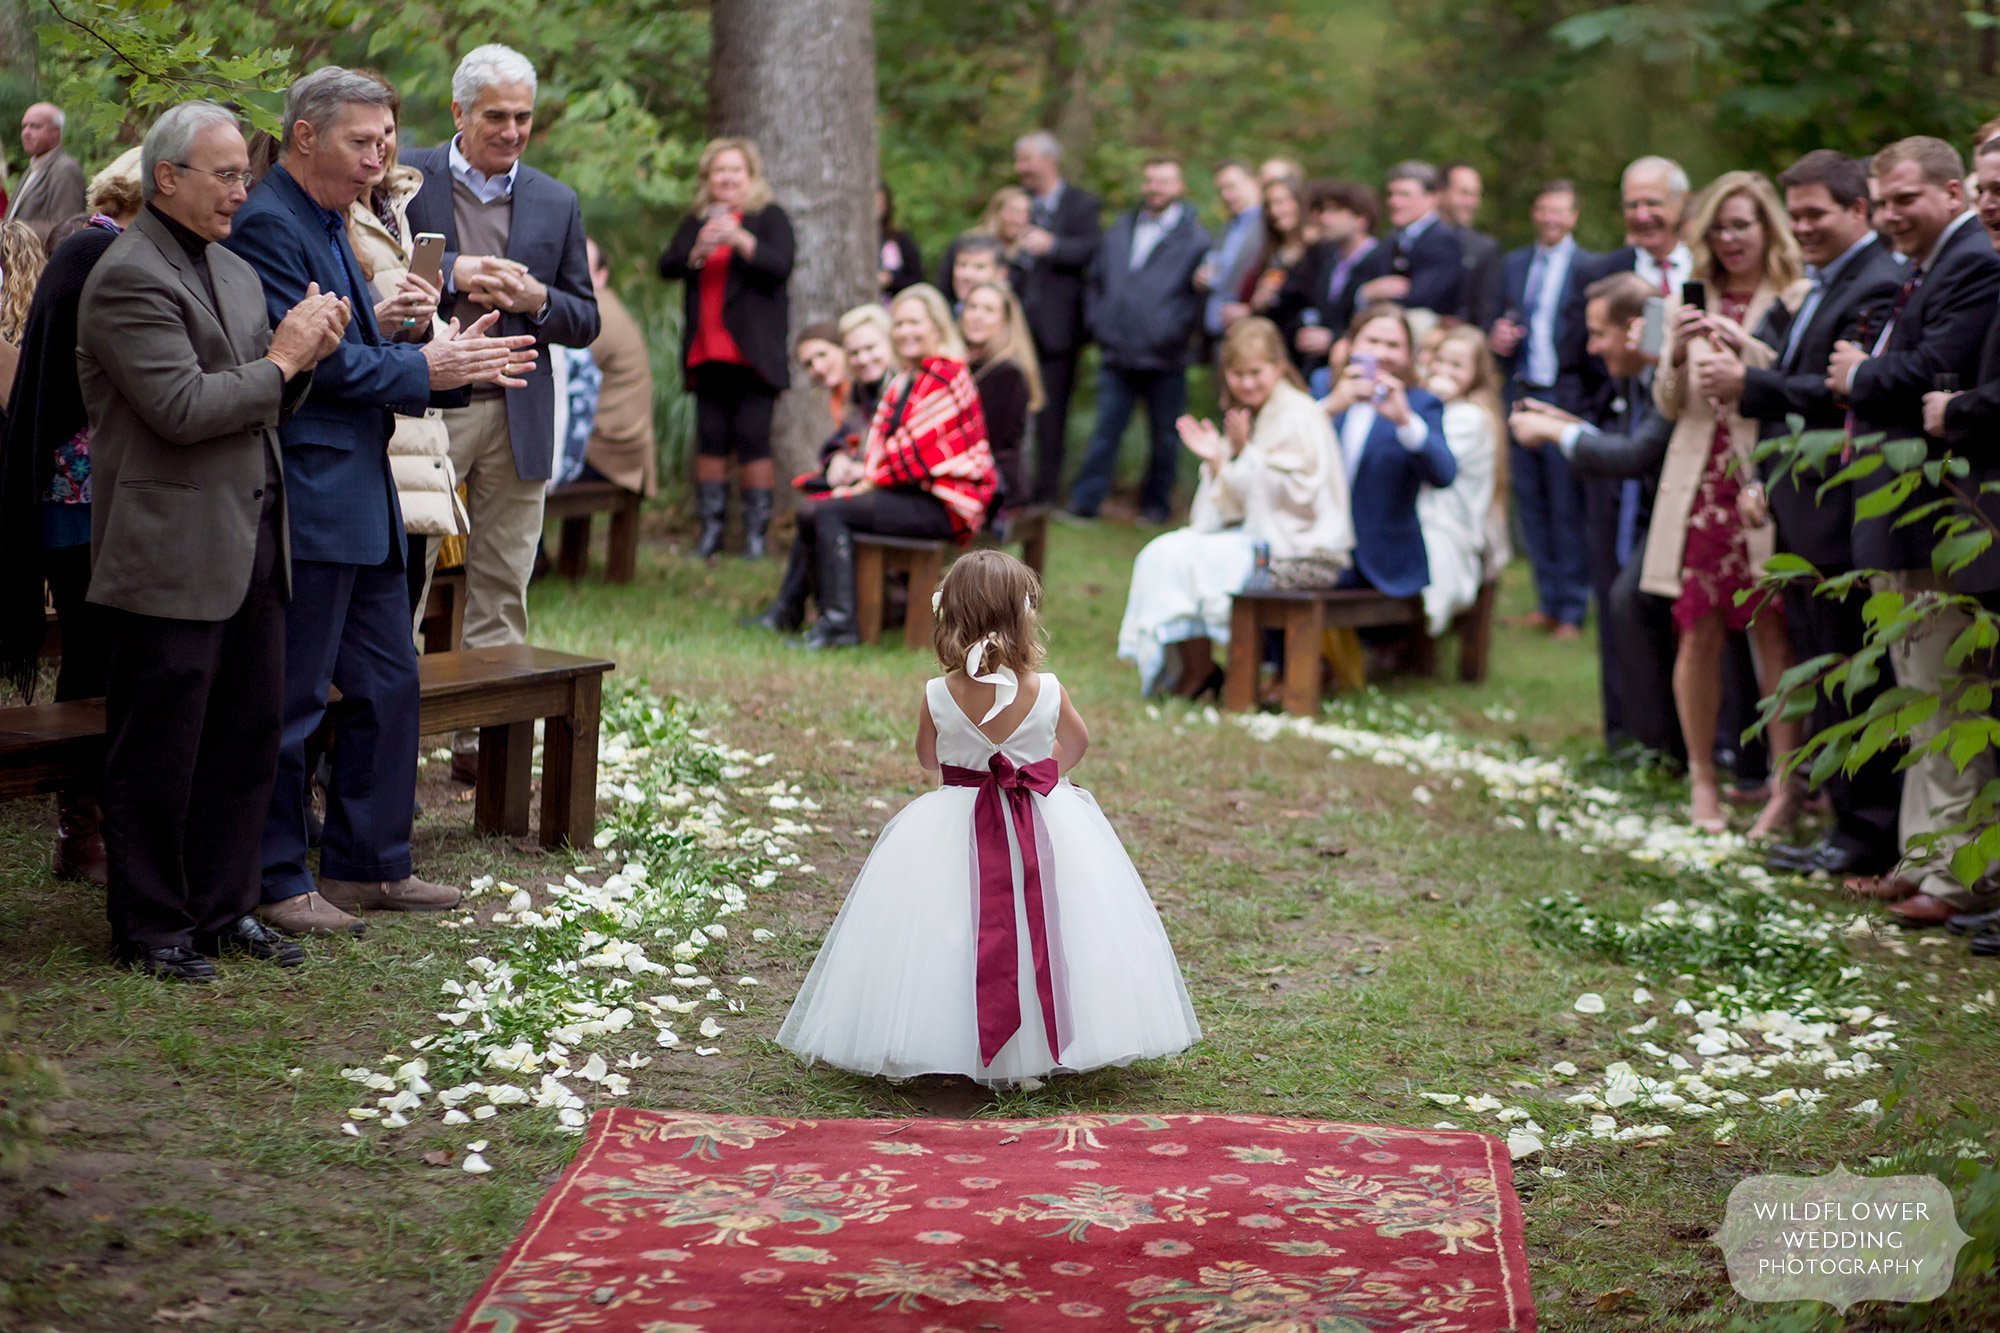 Flower girl walks down aisle at this boho wedding ceremony at Little Piney.